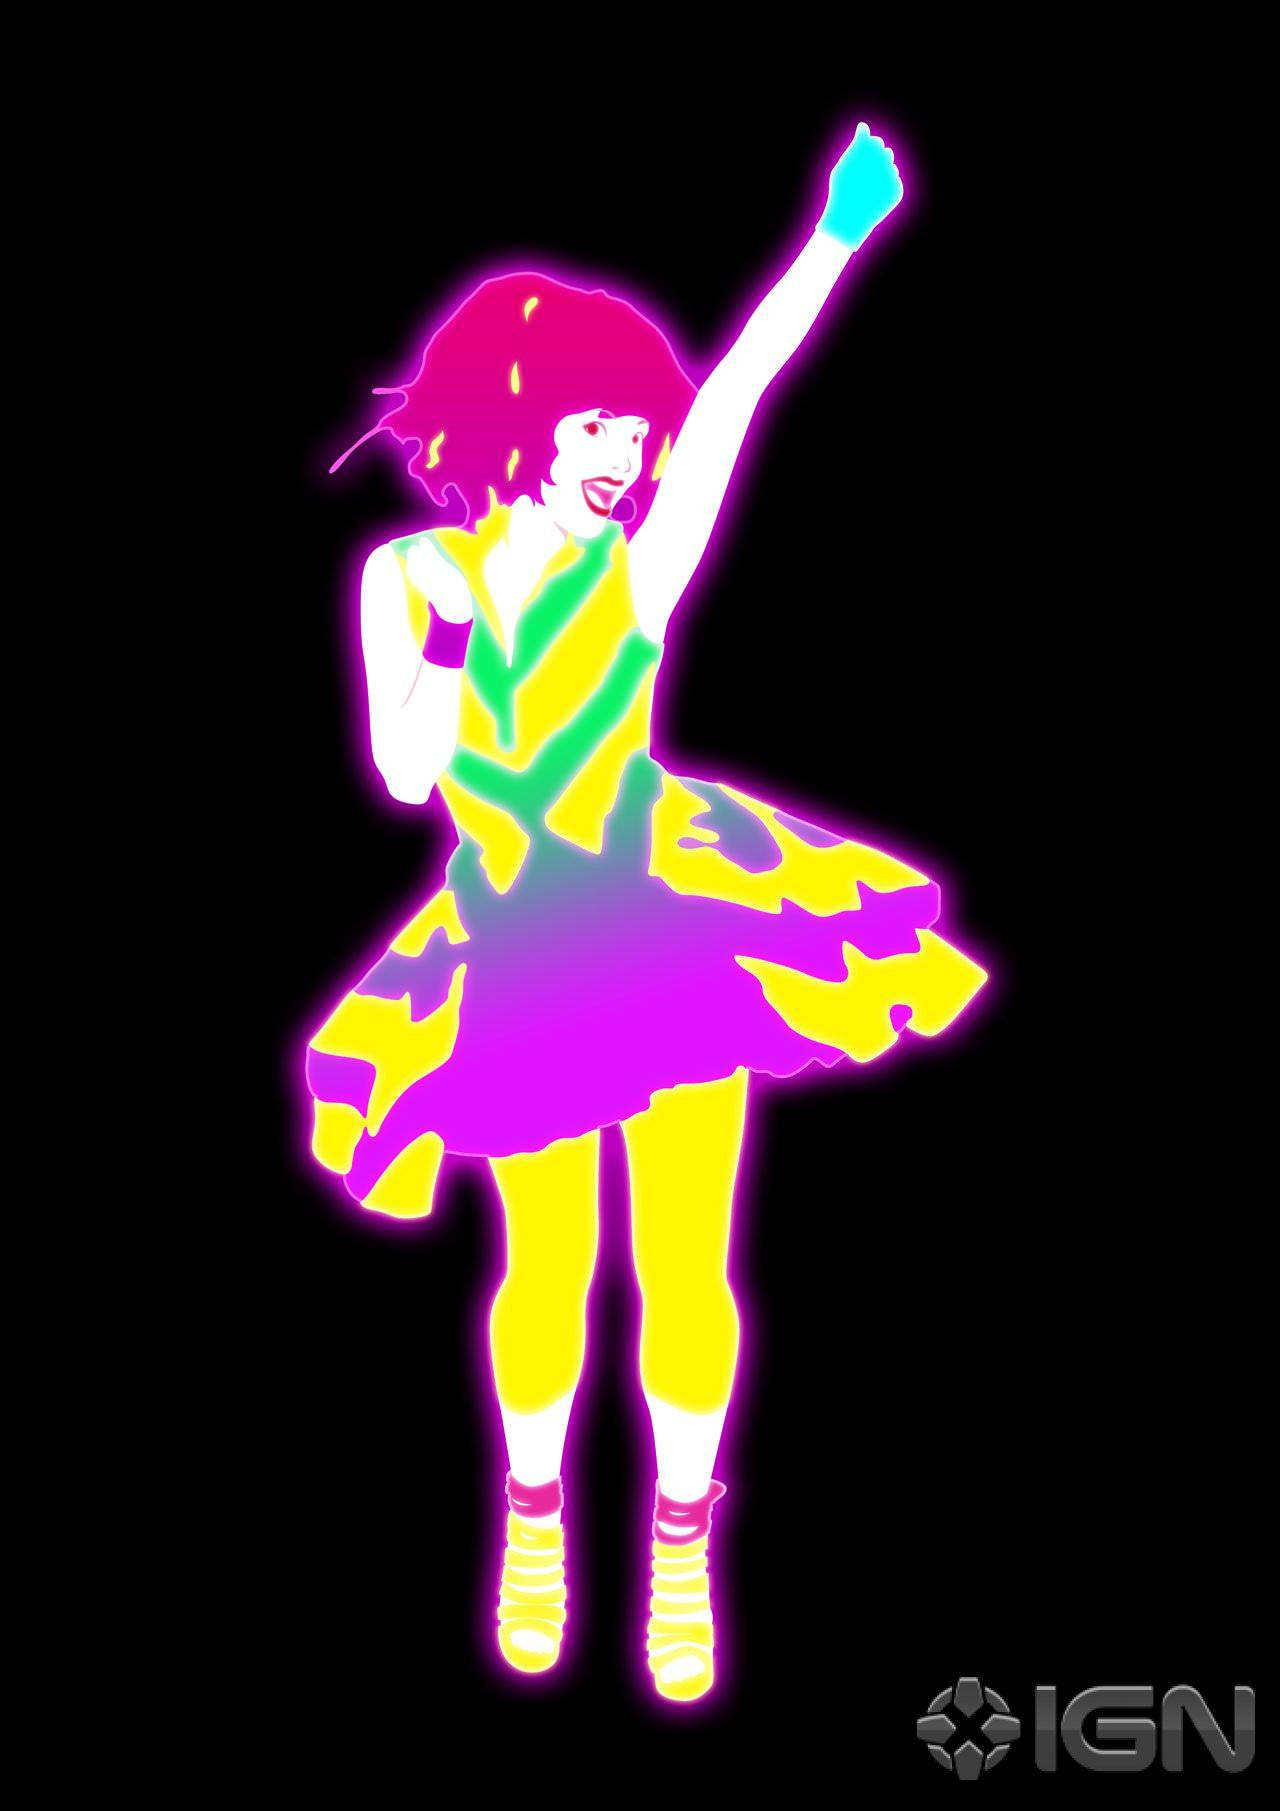 Just Dance Dancer In Colorful Dress